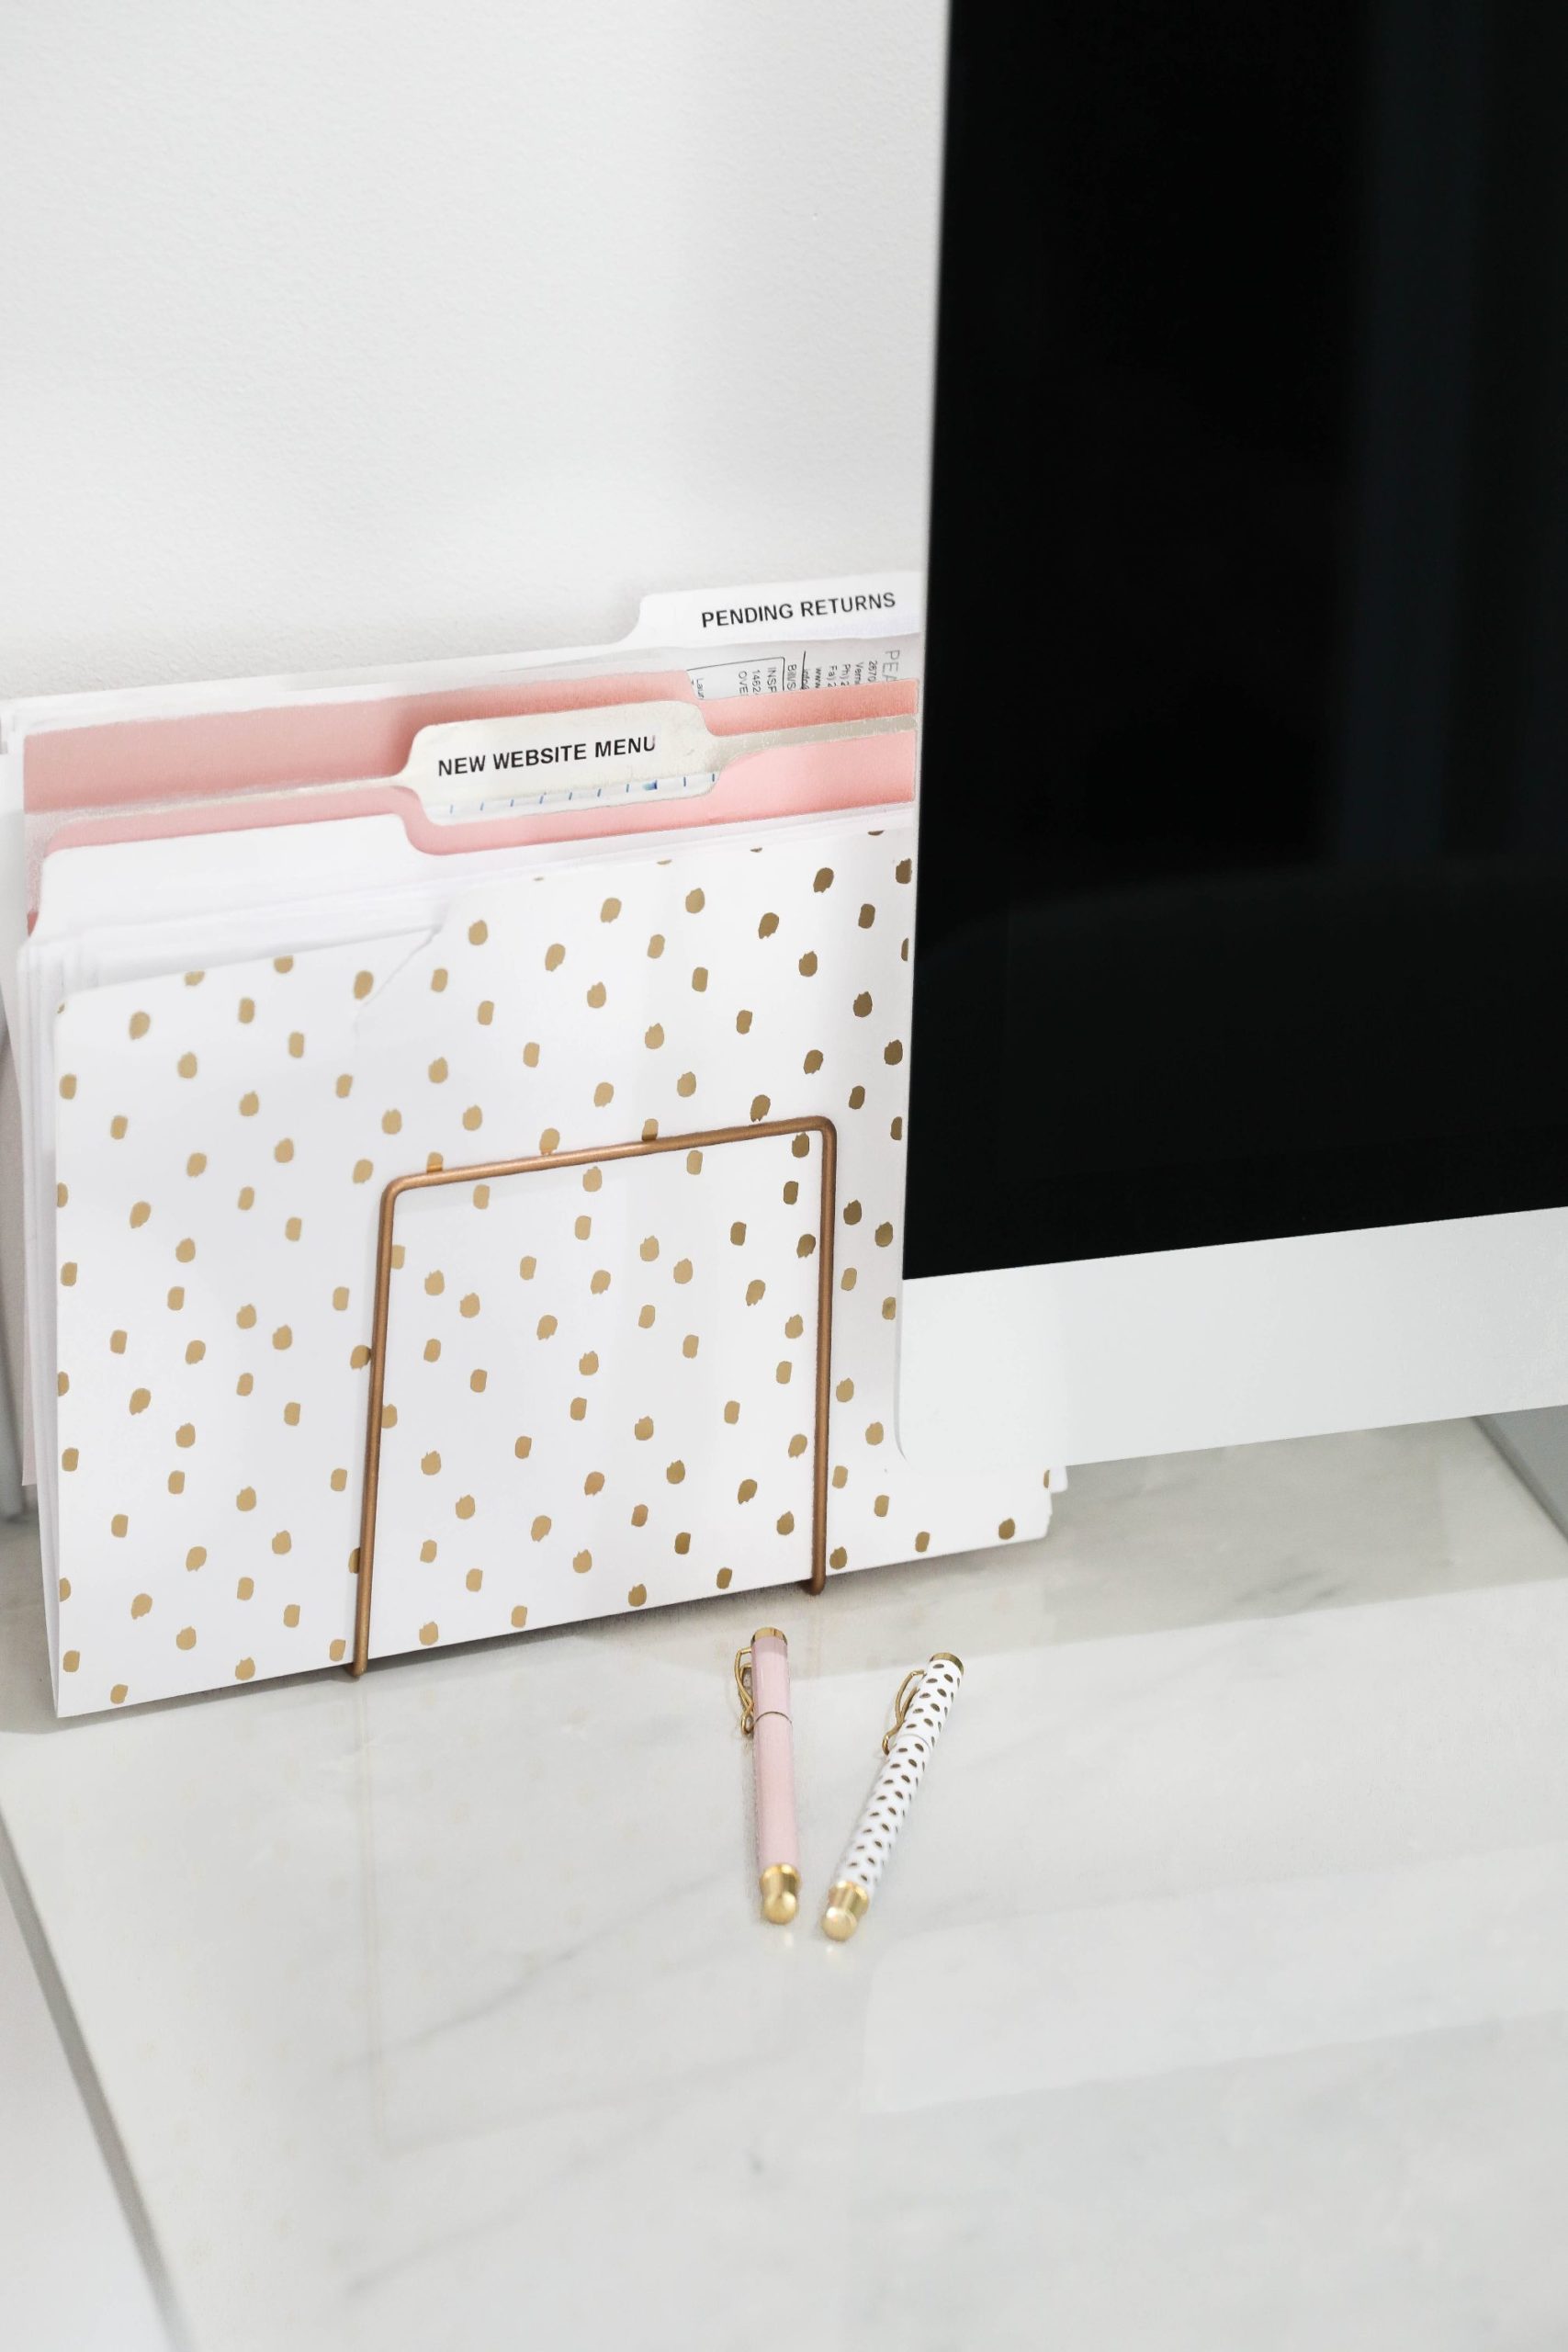 DESK GOALS! All the details on my "Marble and Gold Desk" plus all my office accessories! Details on daily dose of charm by Lauren Lindmark boutique owner of Inspired Boutique